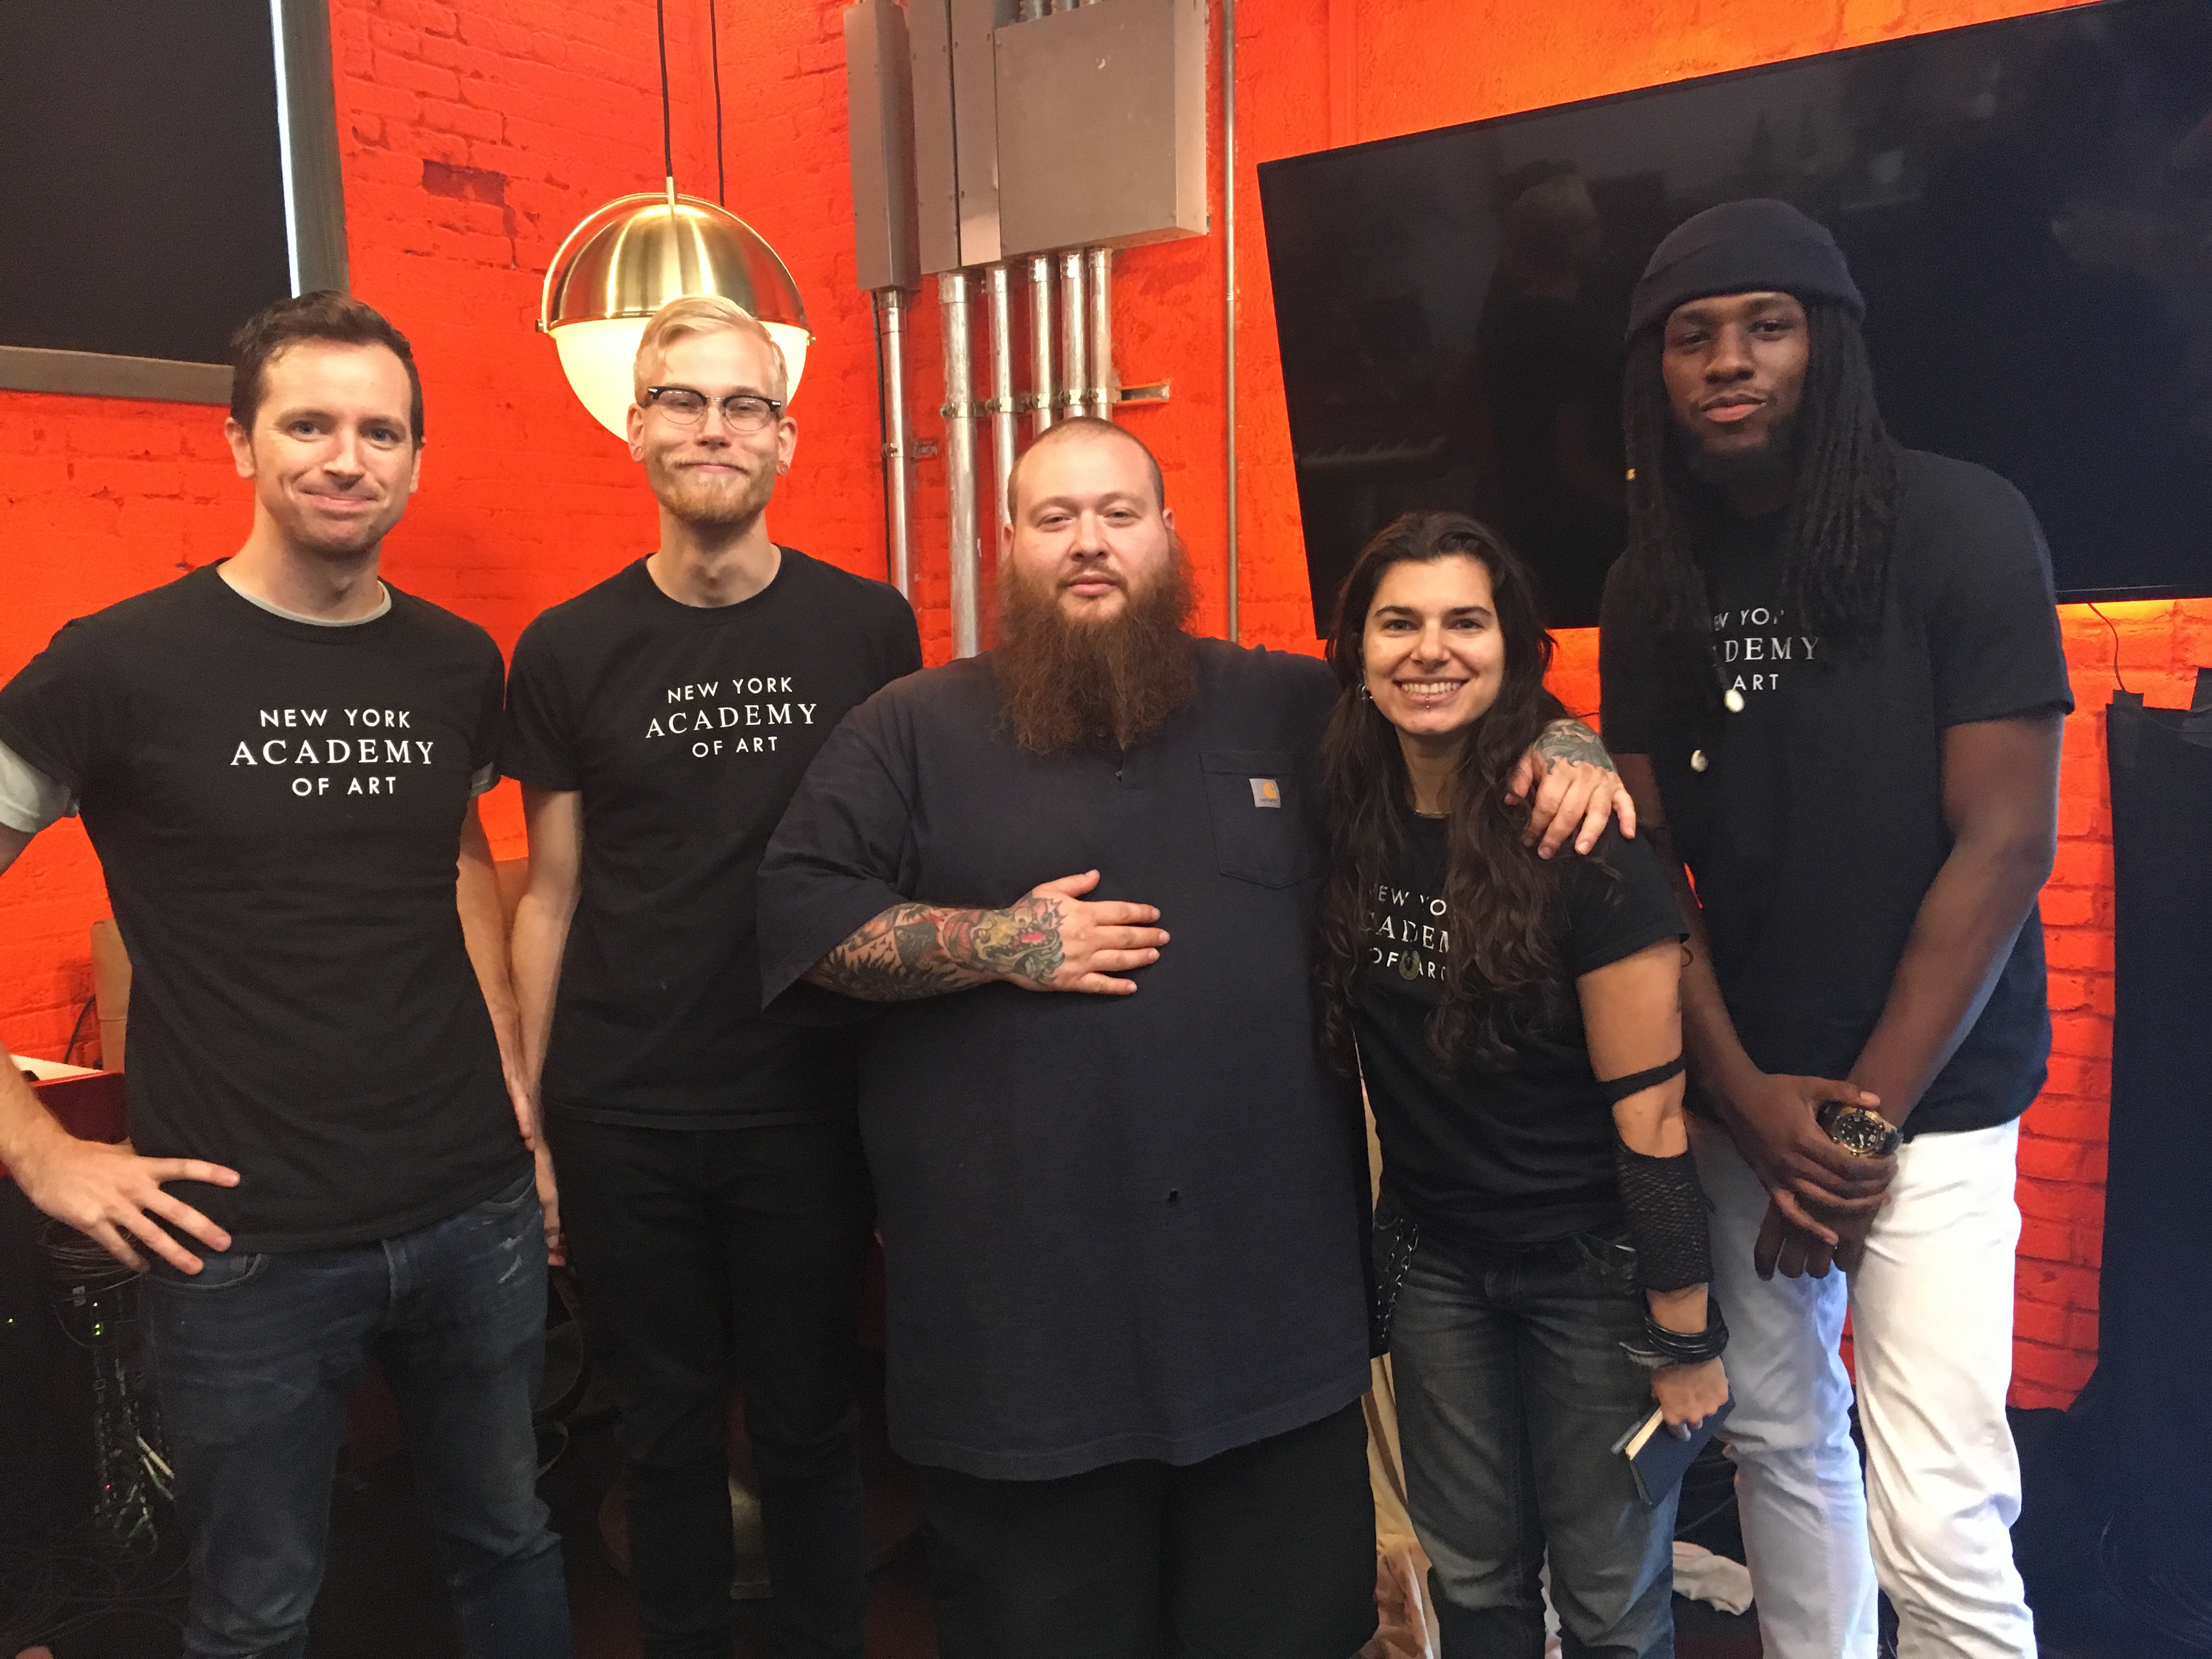 Untitled Action Bronson Show features Academy students